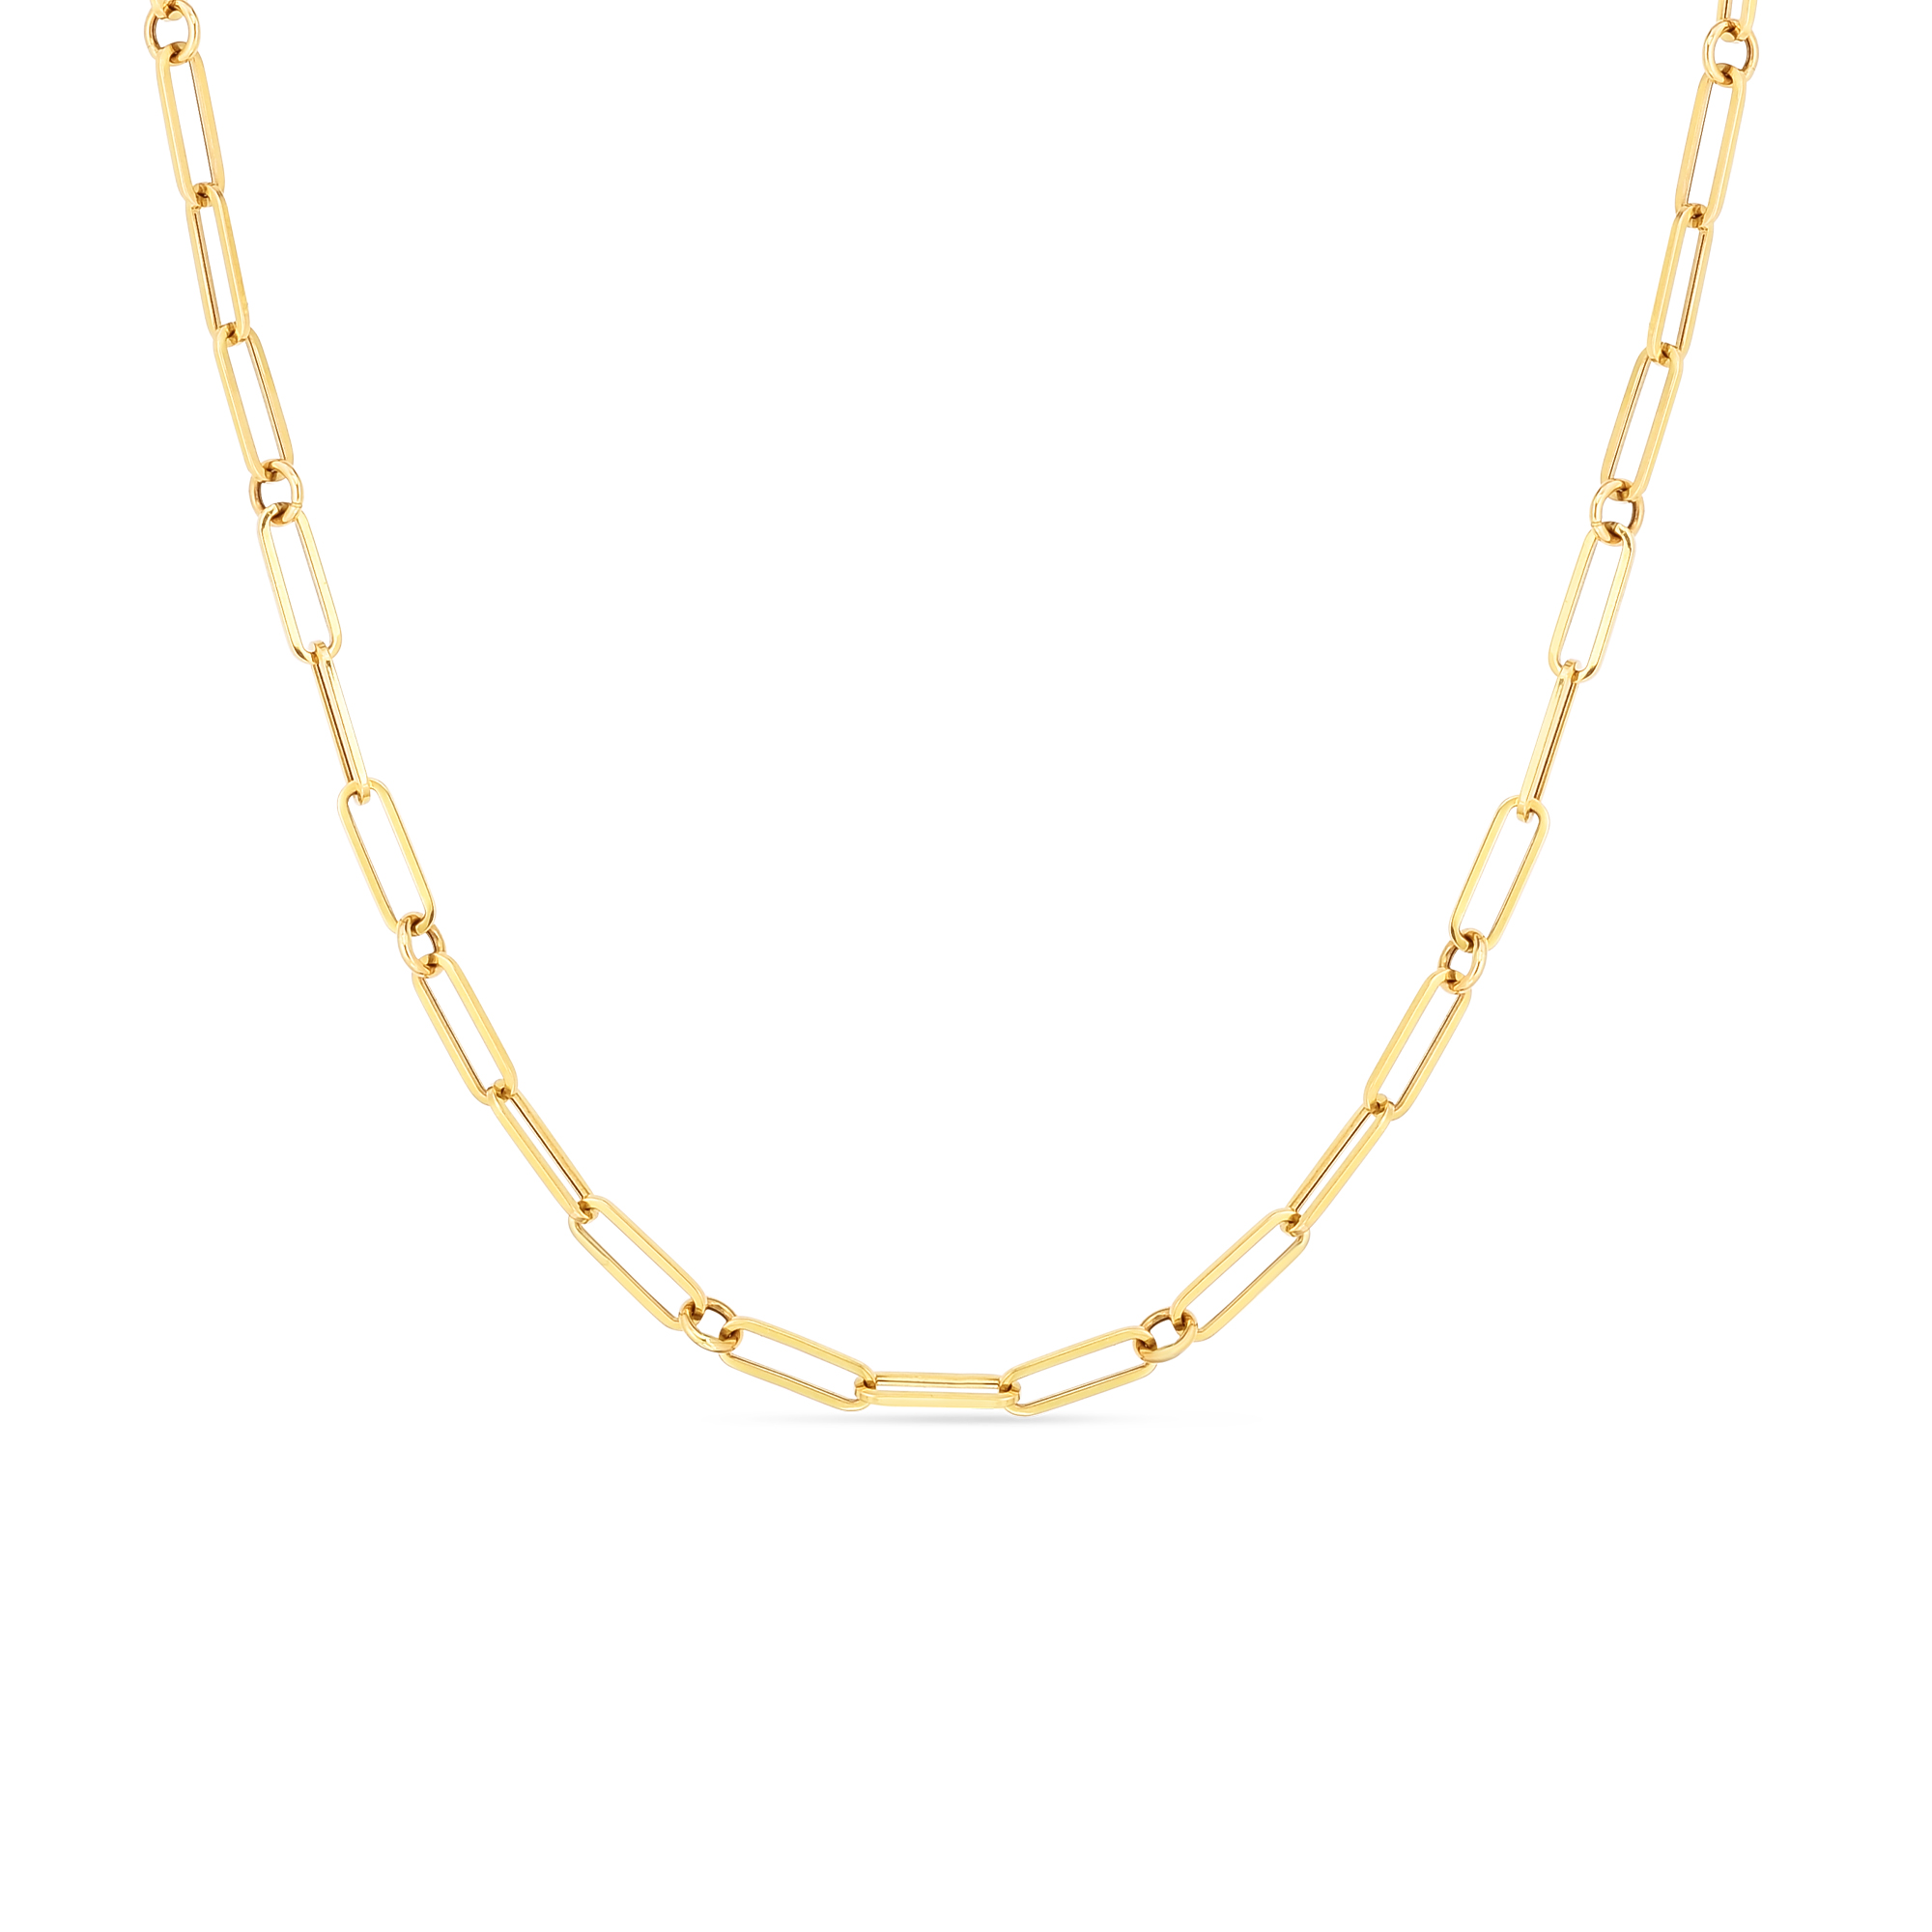 Roberto Coin 18K Yellow Gold Paperclip Chain Necklace Length 34